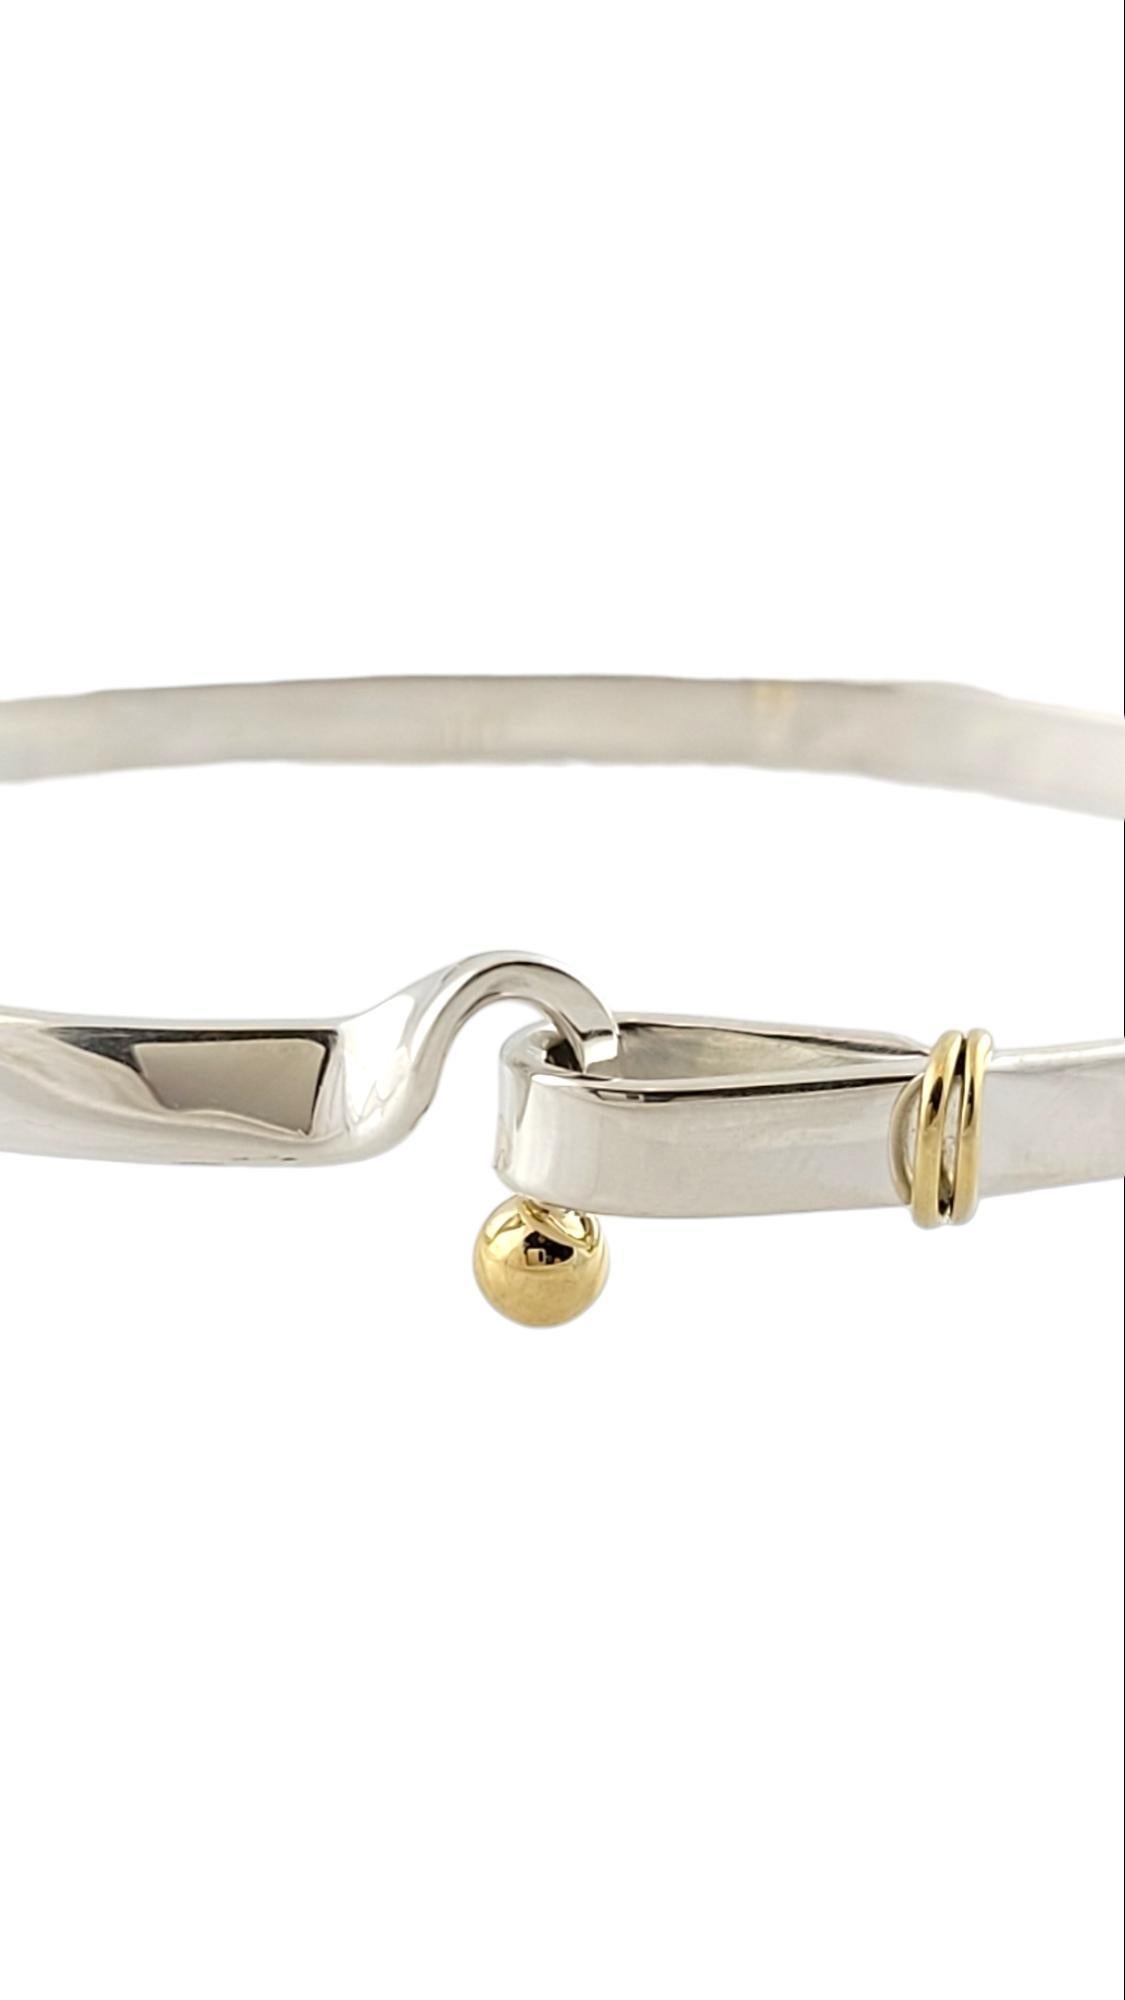 Vintage Tiffany & Co. Sterling Silver and 18K Gold Hook and Eye Bracelet 

This gorgeous Hook and Eye bracelet was crafted from 925 sterling silver and 18K yellow gold by designer Tiffany & Co.

Size: 7